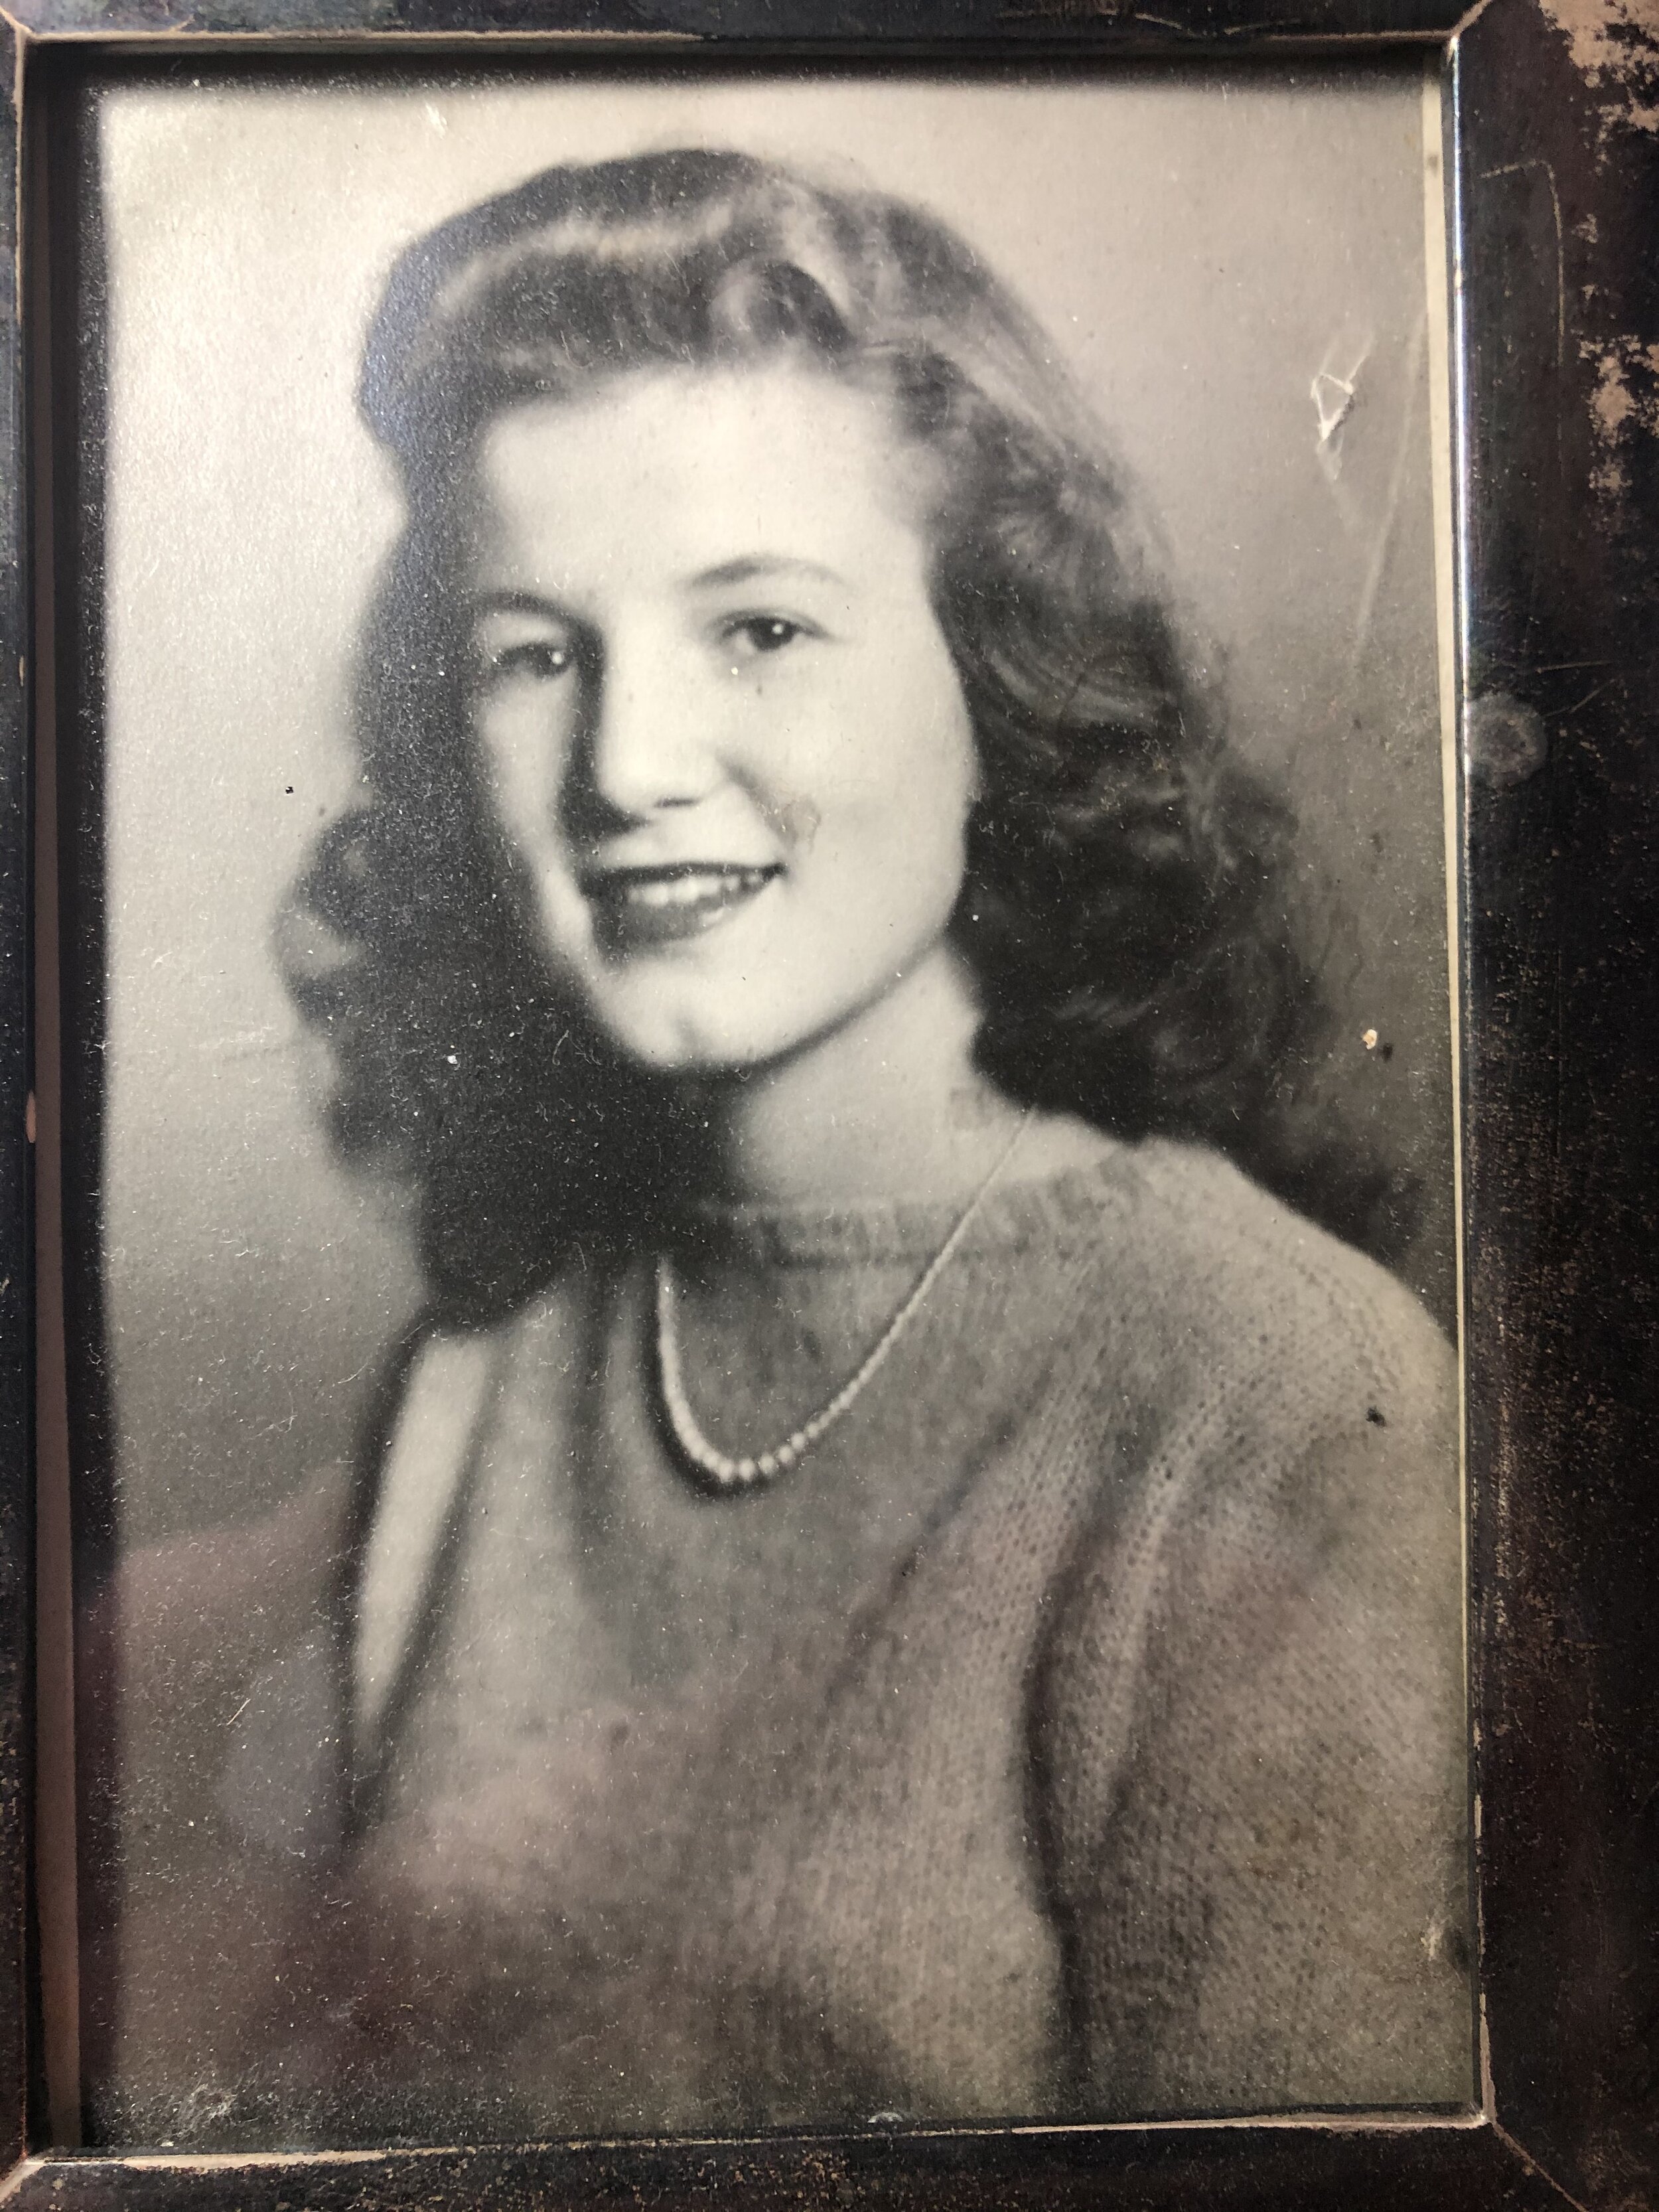  A young Ruth Langdon, ready to take on the world: the image shown may be her graduation photograph from Pine Manor College, MA, 1947 approx. 